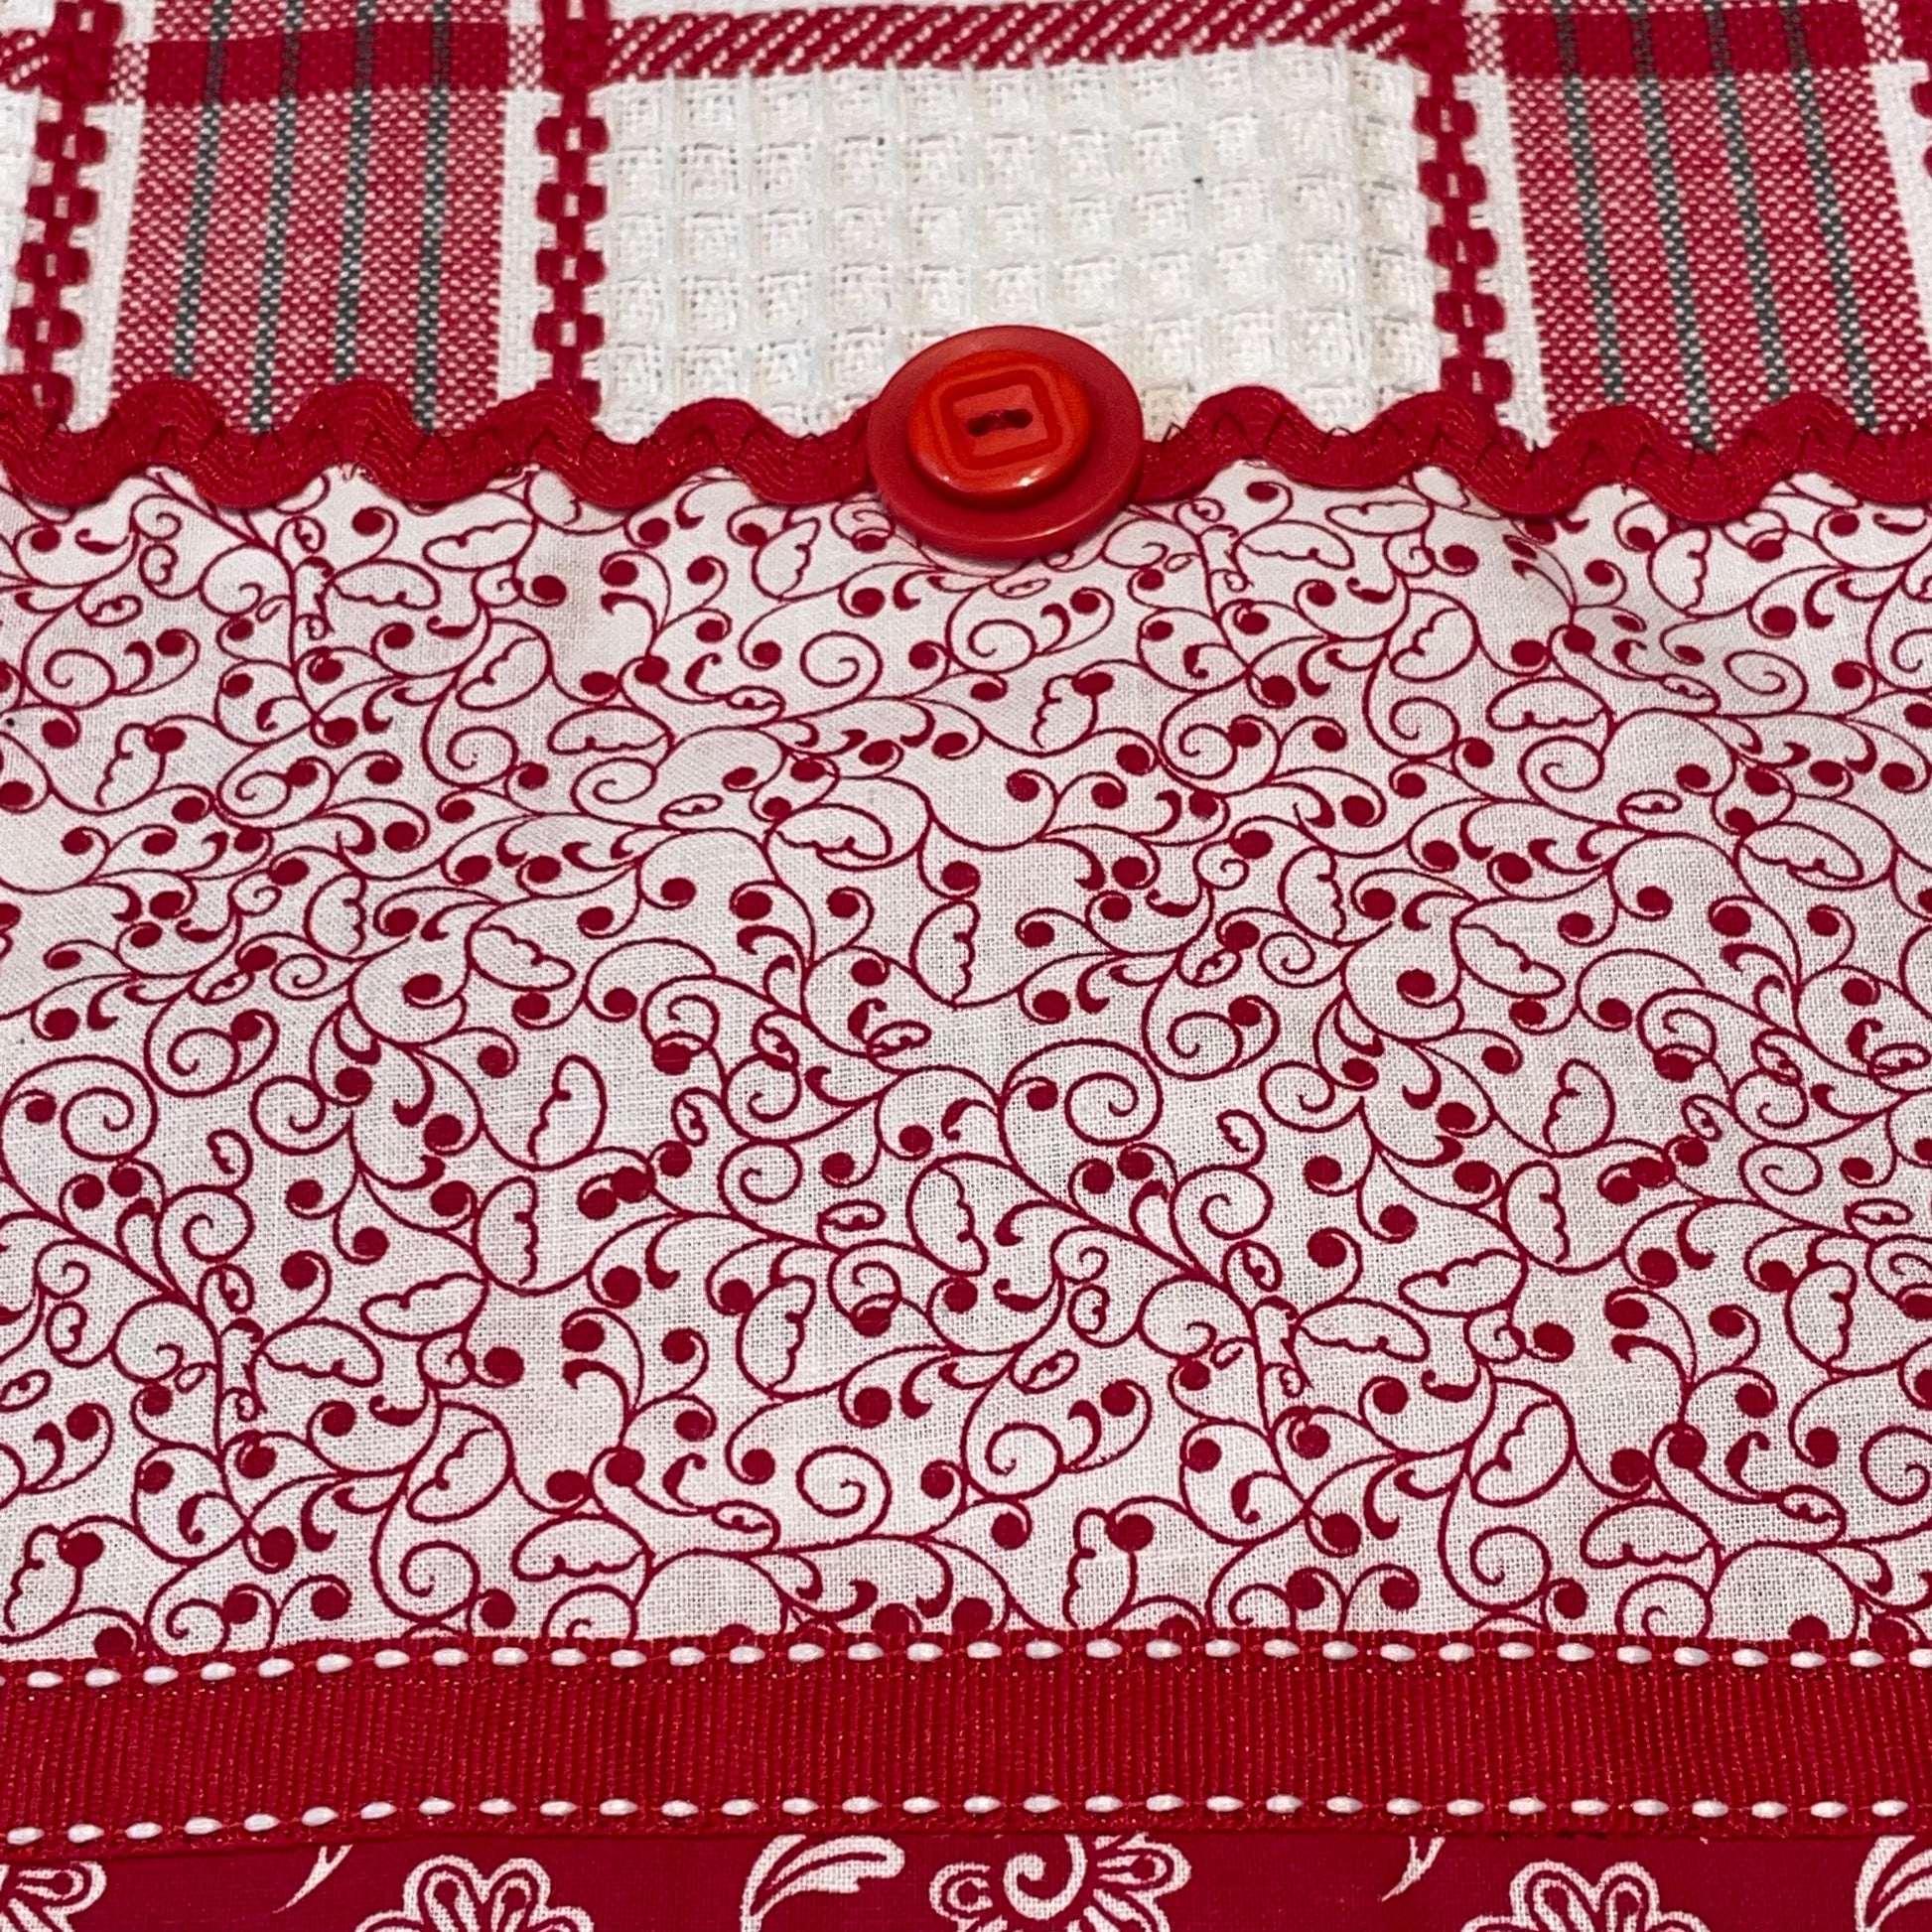 Red and White Kitchen Dish Towel with quilting cotton accents. Featuring Embroidery, Ric Rac and and Button Details. Part of a mix and match collection. Browse the entire line of coordinated products exclusive to Home Stitchery Decor. And be sure to watch the Home Stitchery Decor YouTube Channel.